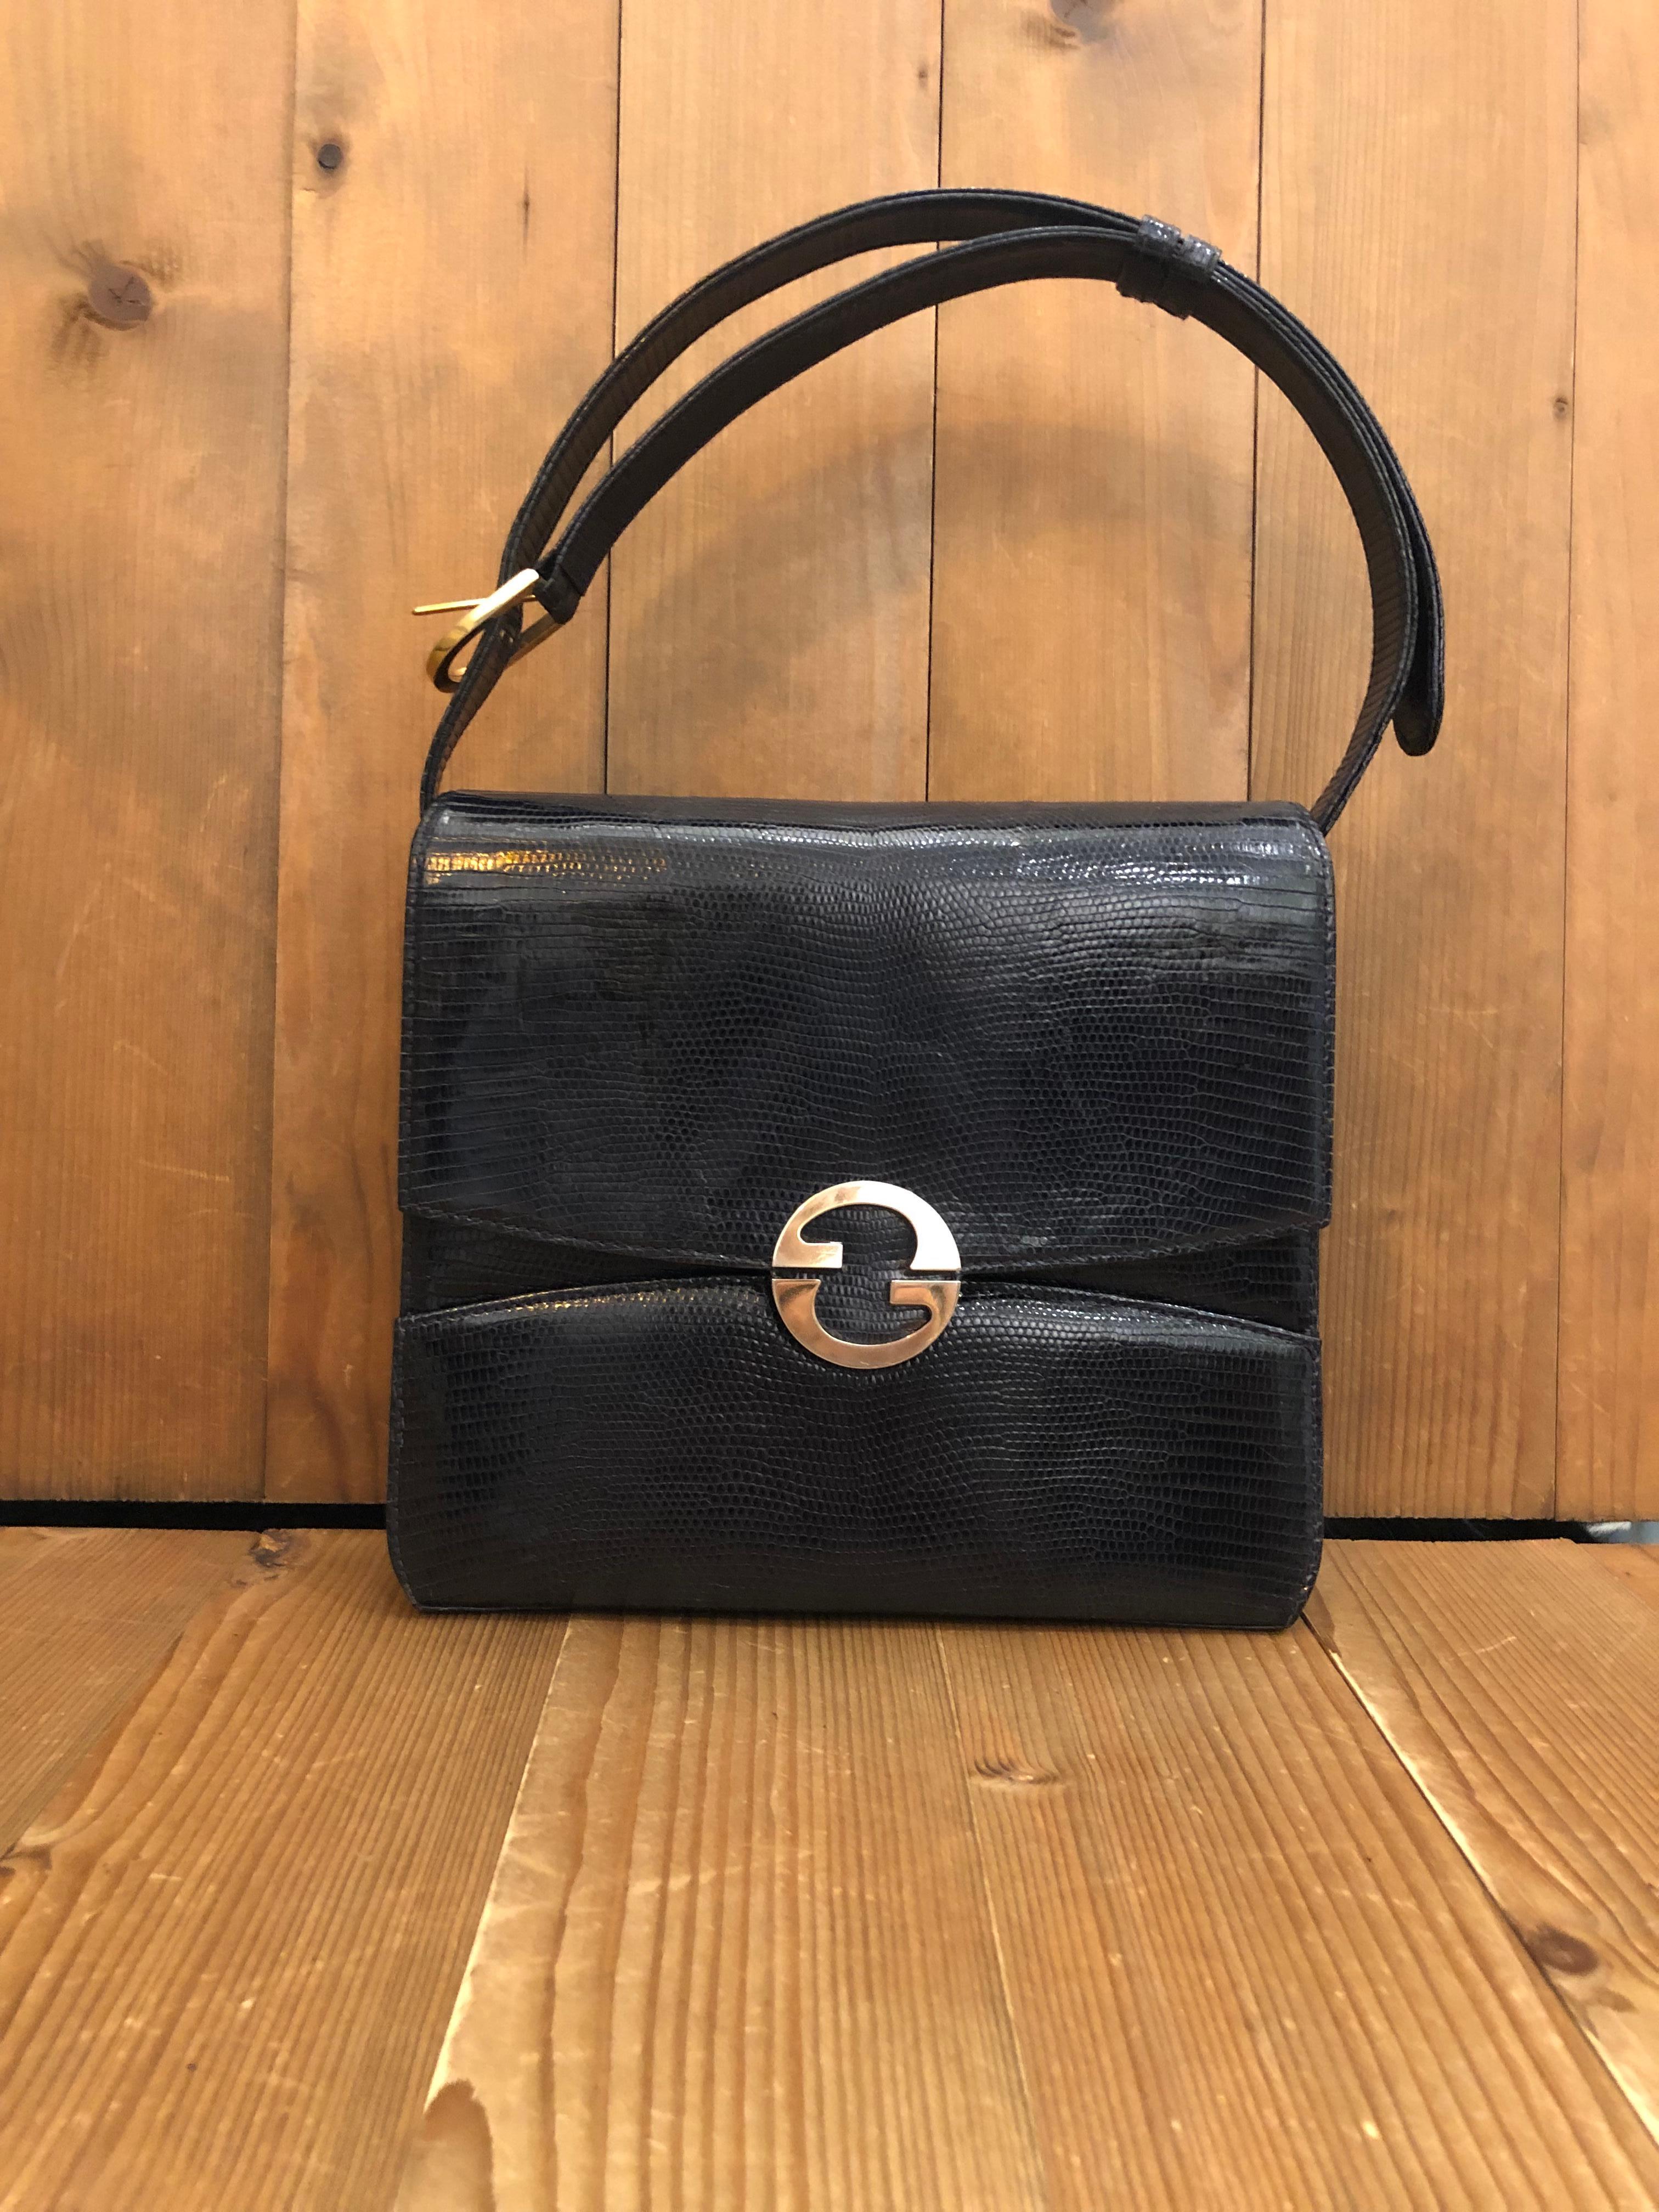 This vintage Gucci box shoulder bag is crafted of exotic leather in black featuring gold toned hardware. Front flap spring GG closure opens to black leather interior featuring three compartments including one middle compartment with flap closure.